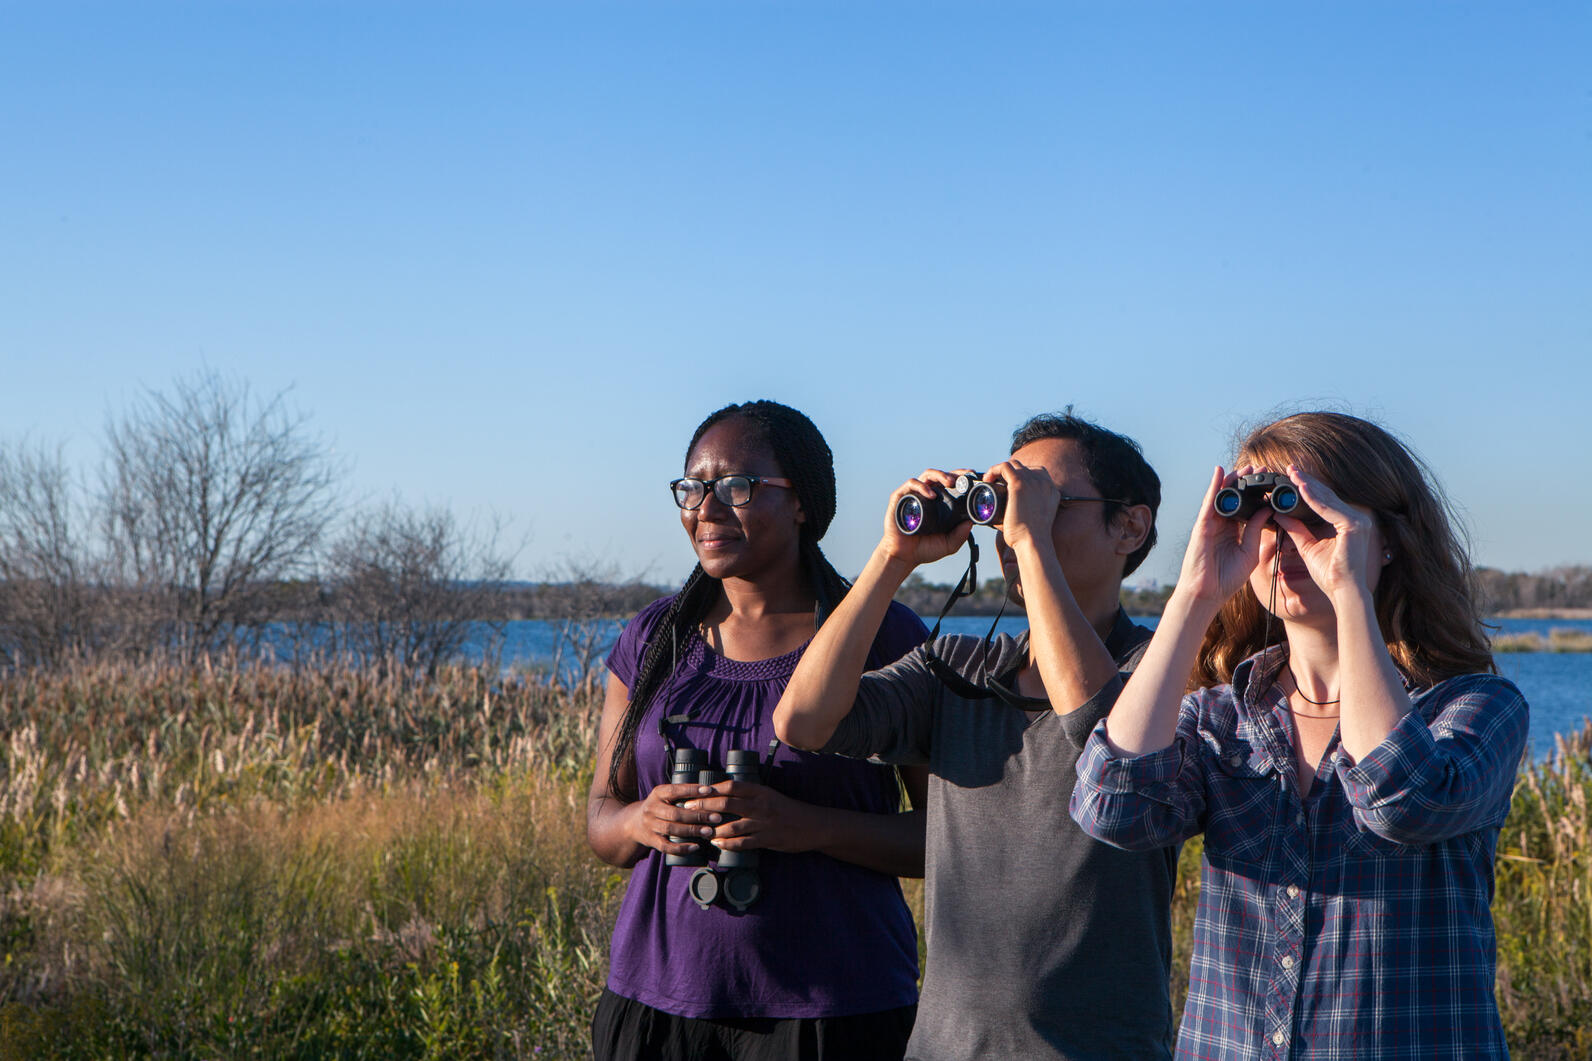 Three people look off into the distance, two of them through binoculars while the 3rd holds a pair in their hands. Behind them are aquatic plants, probably rushes and cattails, and further past that is a lake.